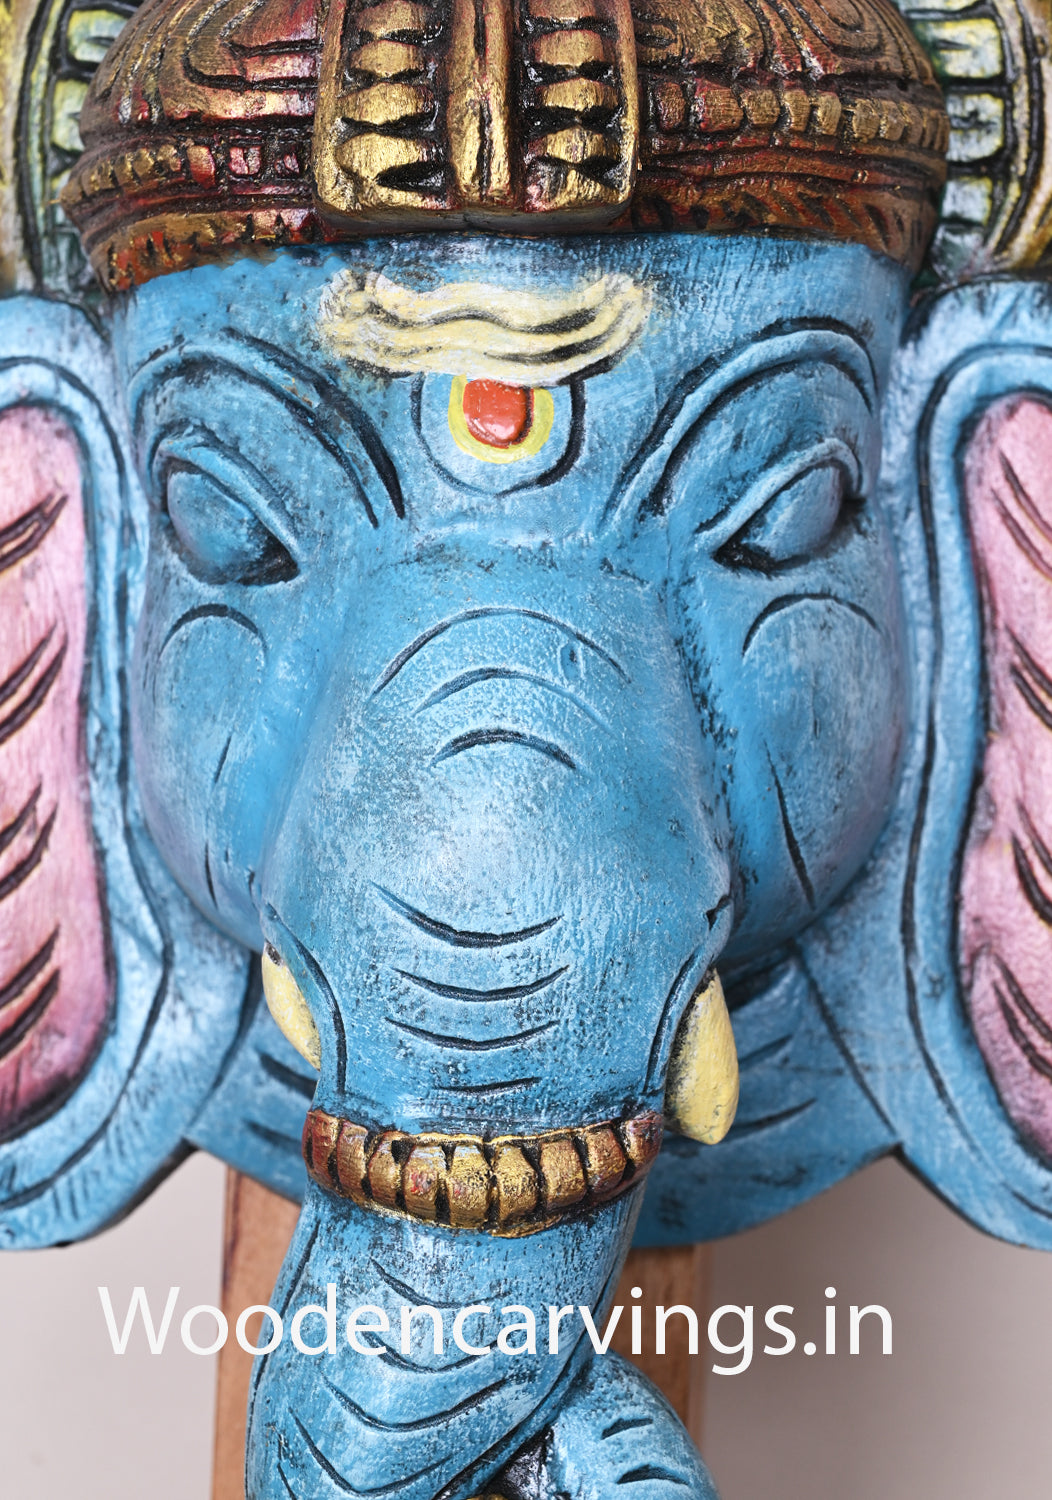 Sky Blue Beauty Lord Ganapathi Light Weight Handmade Wooden Hooks Fixed Mask For Your Beautiful Entrances 16"